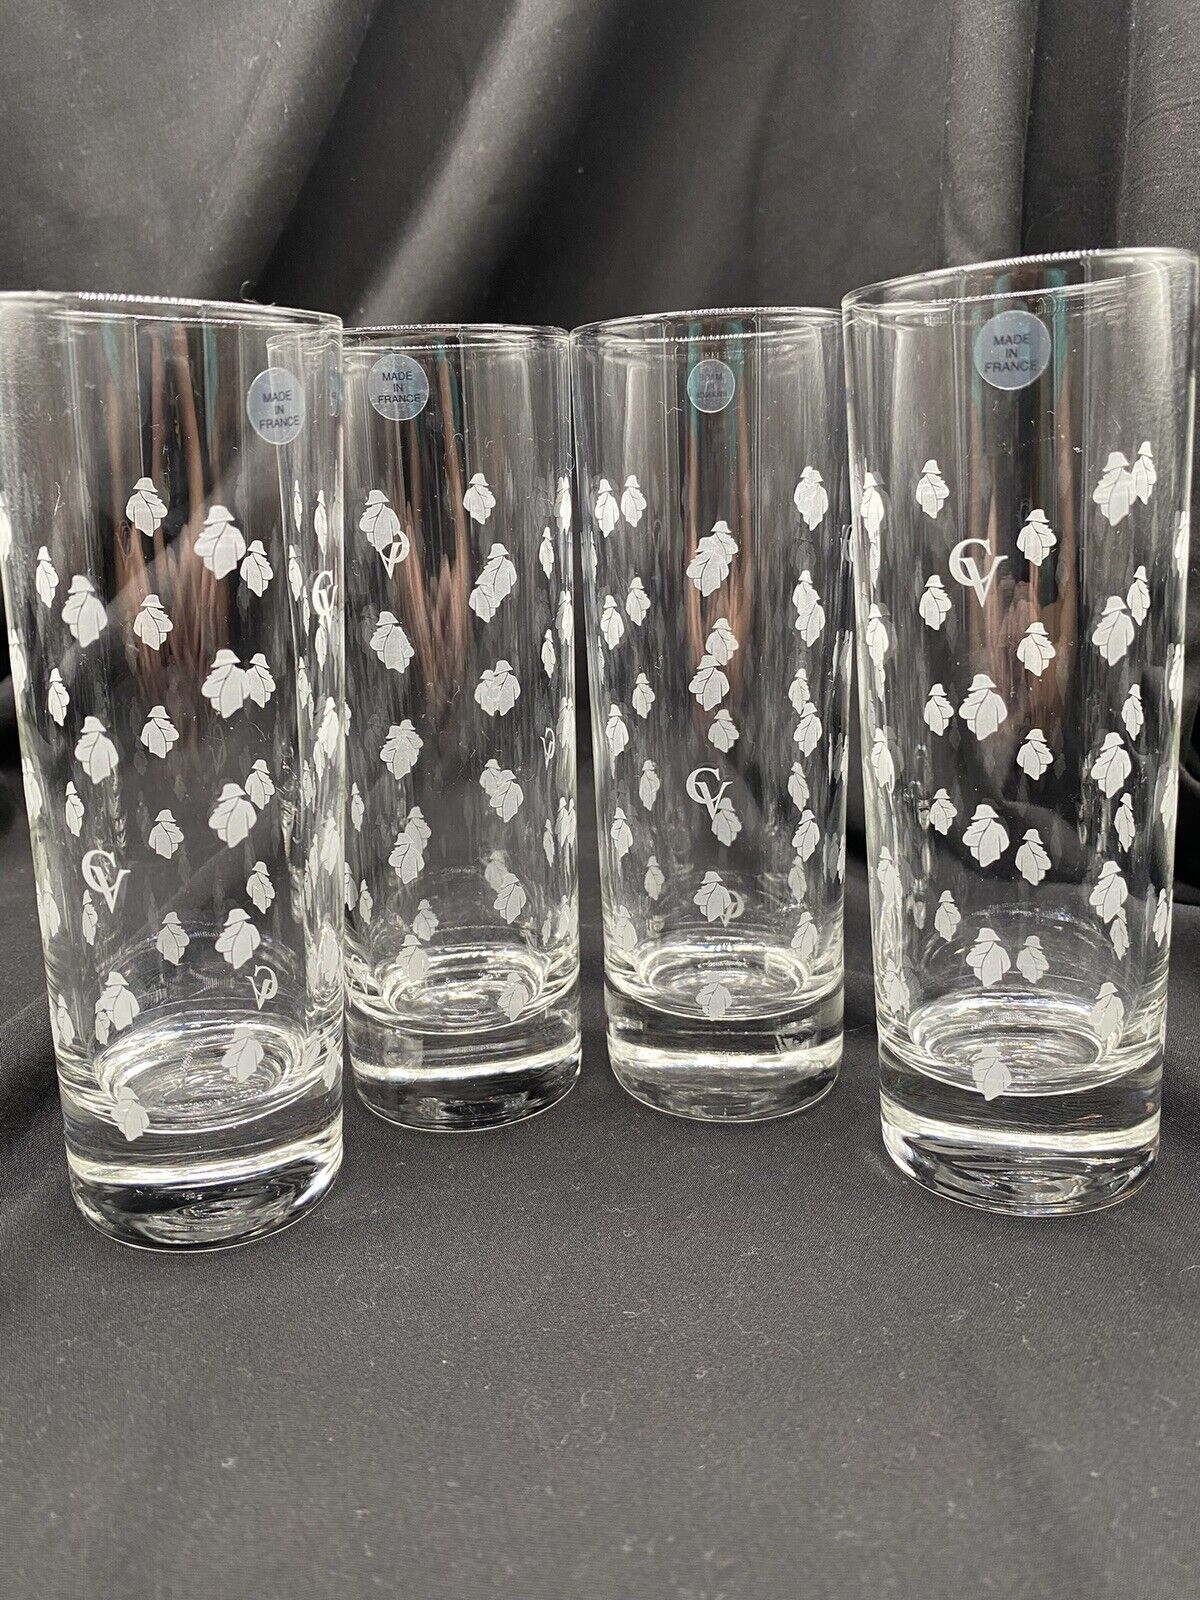 Courvoisier Highball Glasses / Etched / Made in France GorgeousSet of 4 